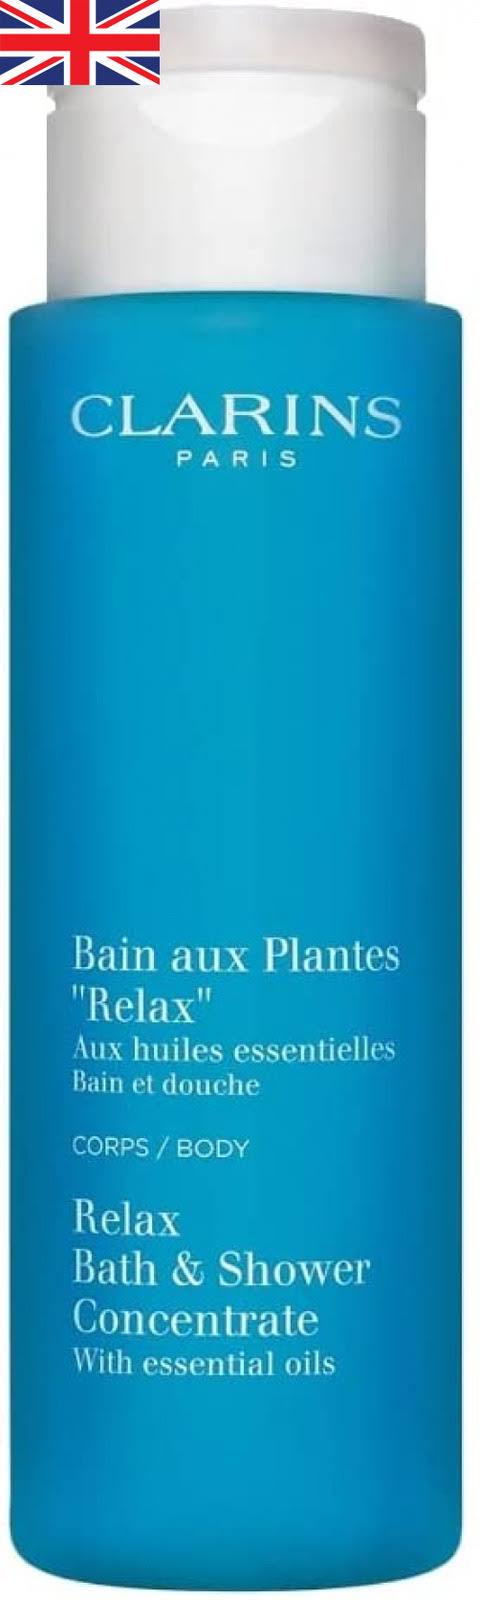 Clarins Relax Bath and Shower Concentrate Gel - 200ml